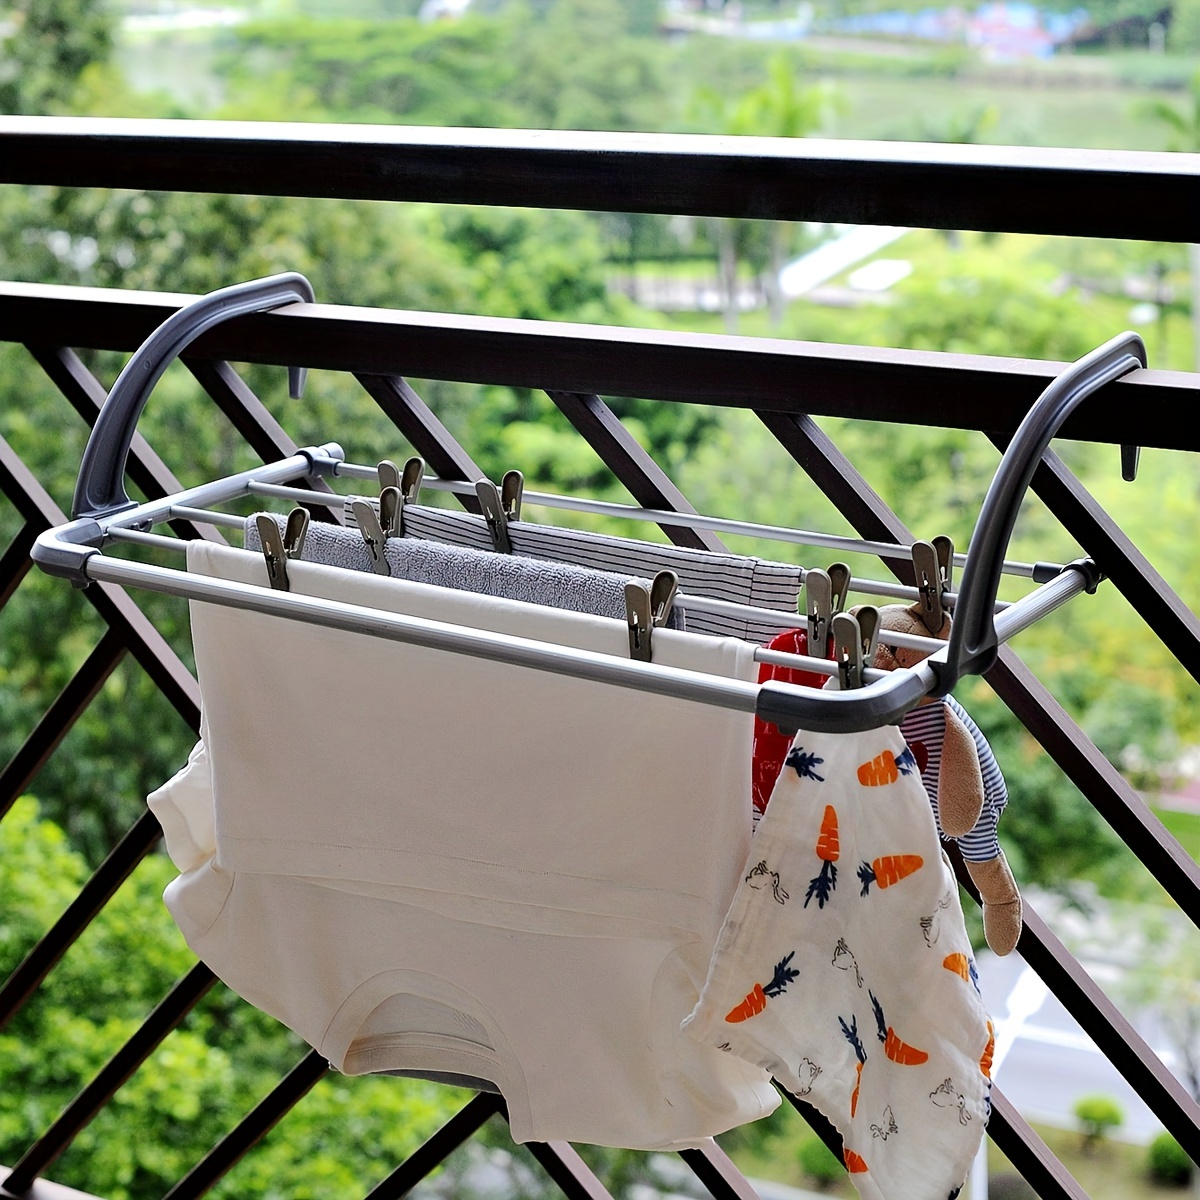 Balcony Drying Rack, Stainless Steel Space-Saving Laundry Rack, Folding  Retractable Collapsible Drying Rack, Shoe Rack, For Clothes, Shoes, Potted